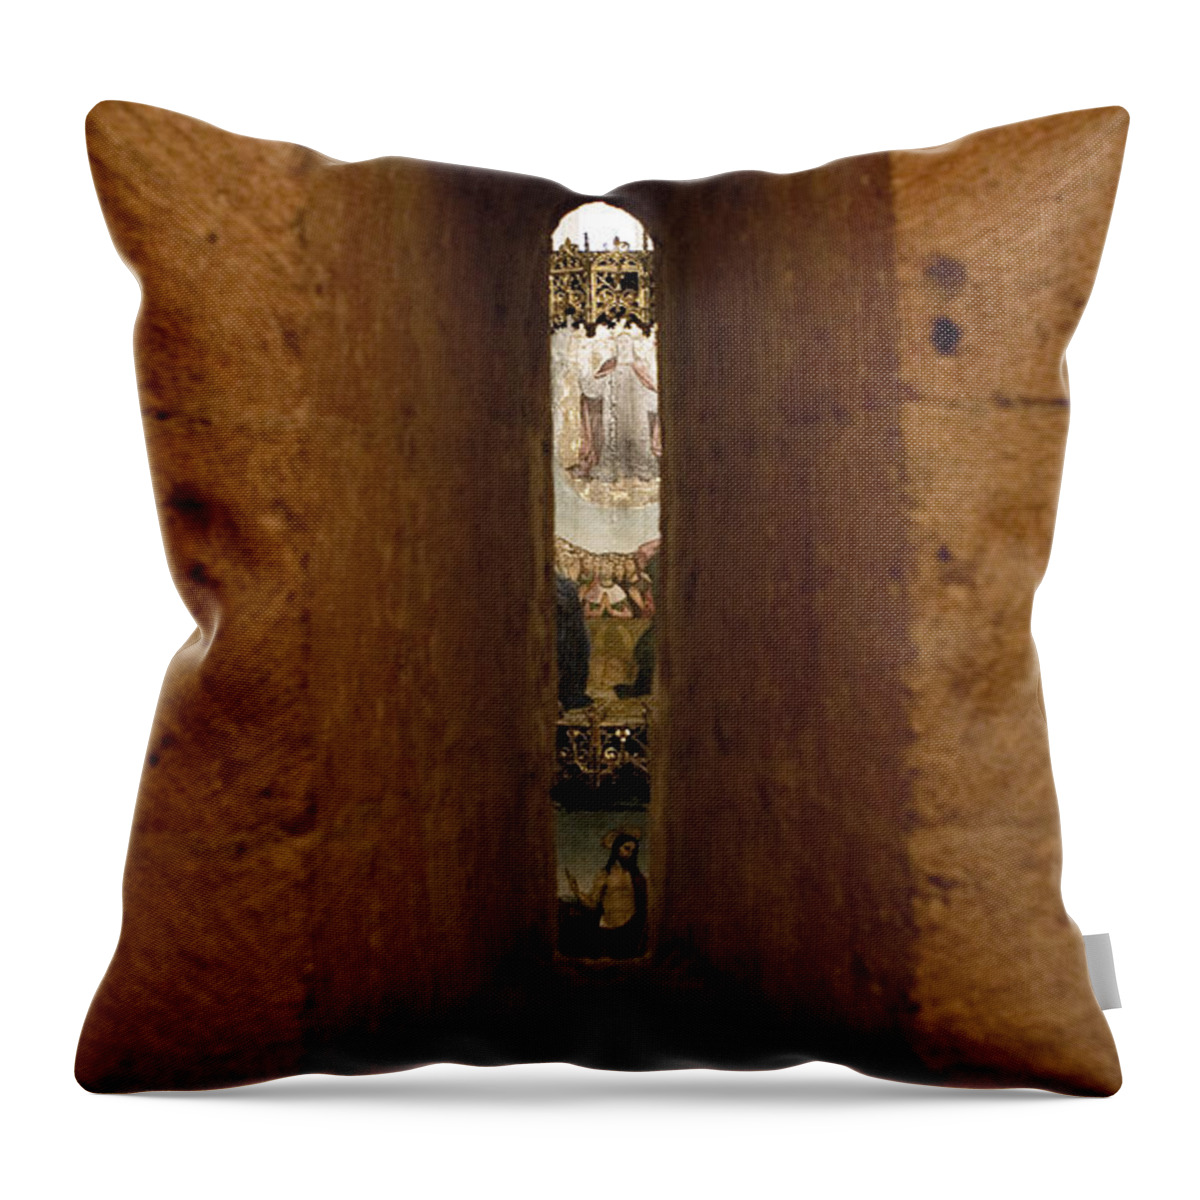 Suckling Pig Throw Pillow featuring the photograph Glimpse of An Altar by Lorraine Devon Wilke